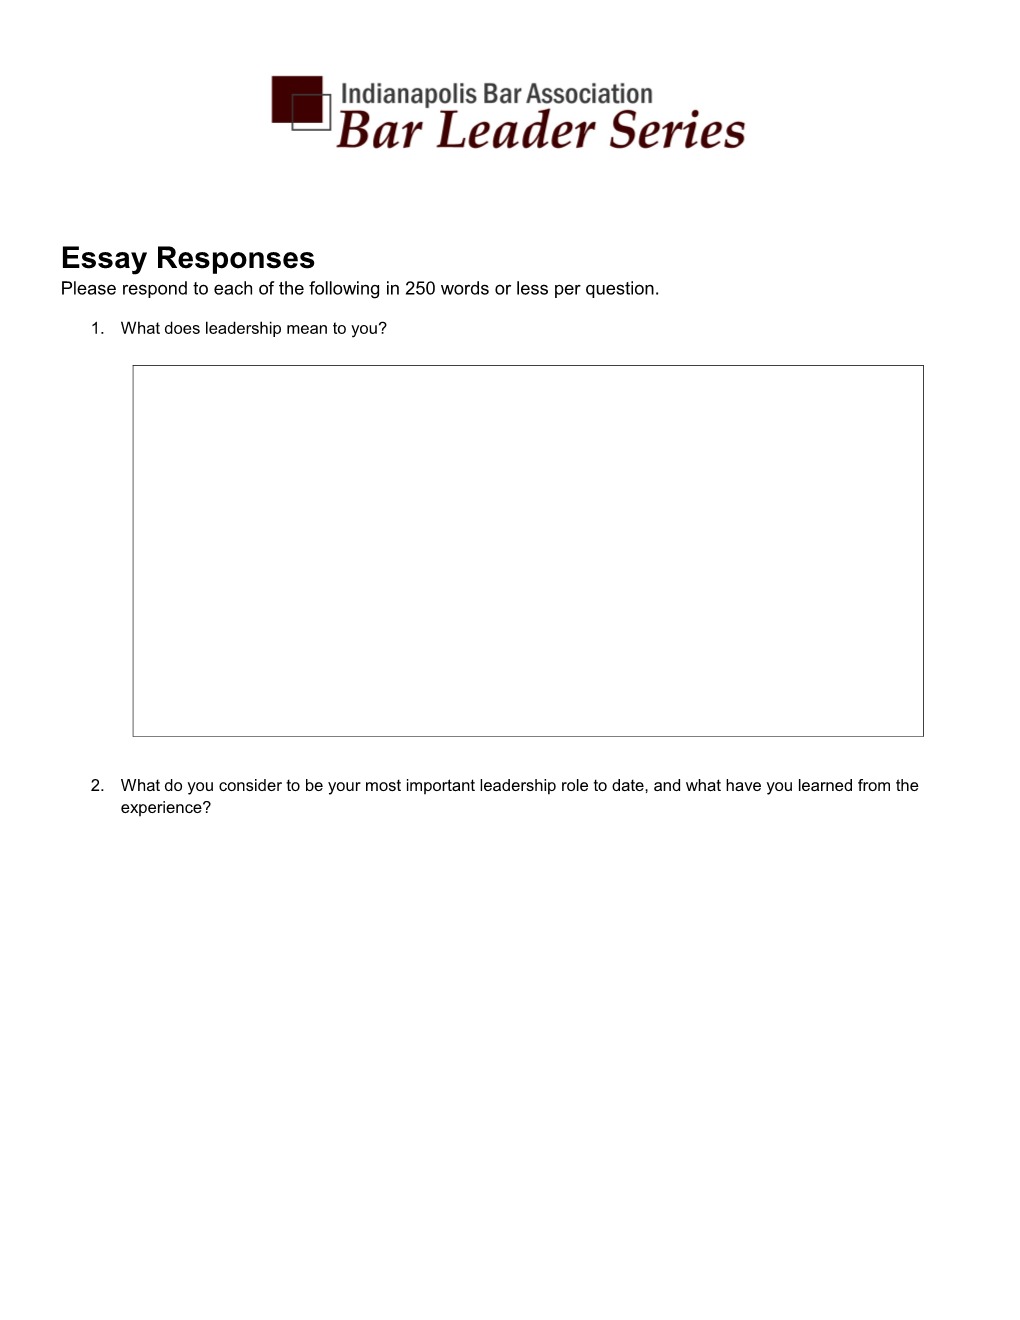 Please Type Responses in the Grey Boxes on This Form